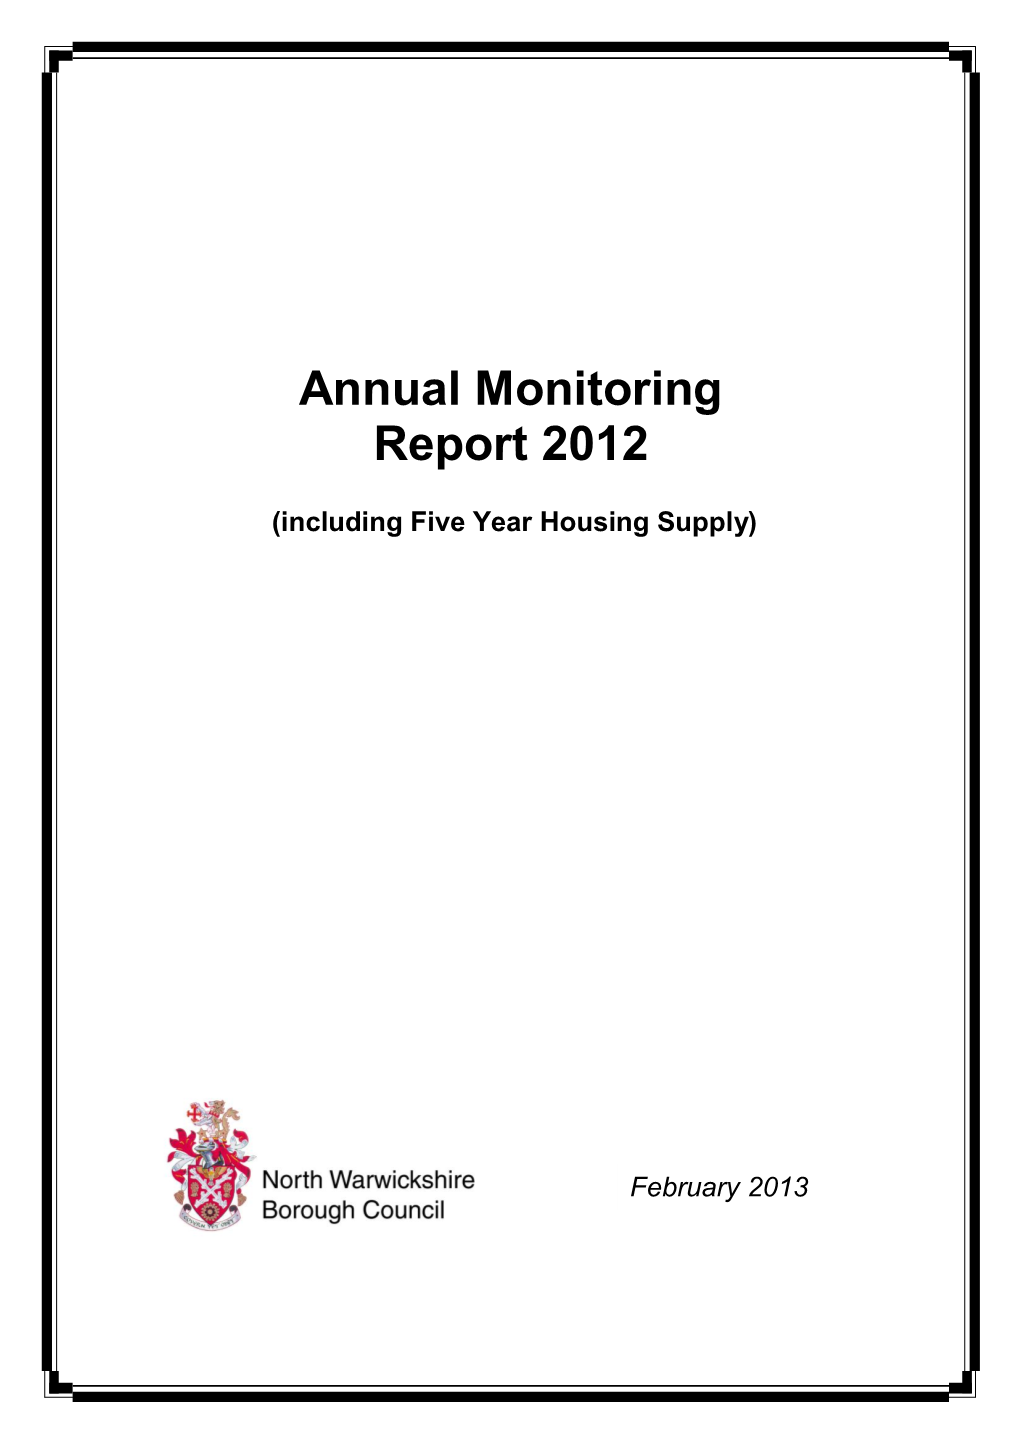 Annual Monitoring Report 2012